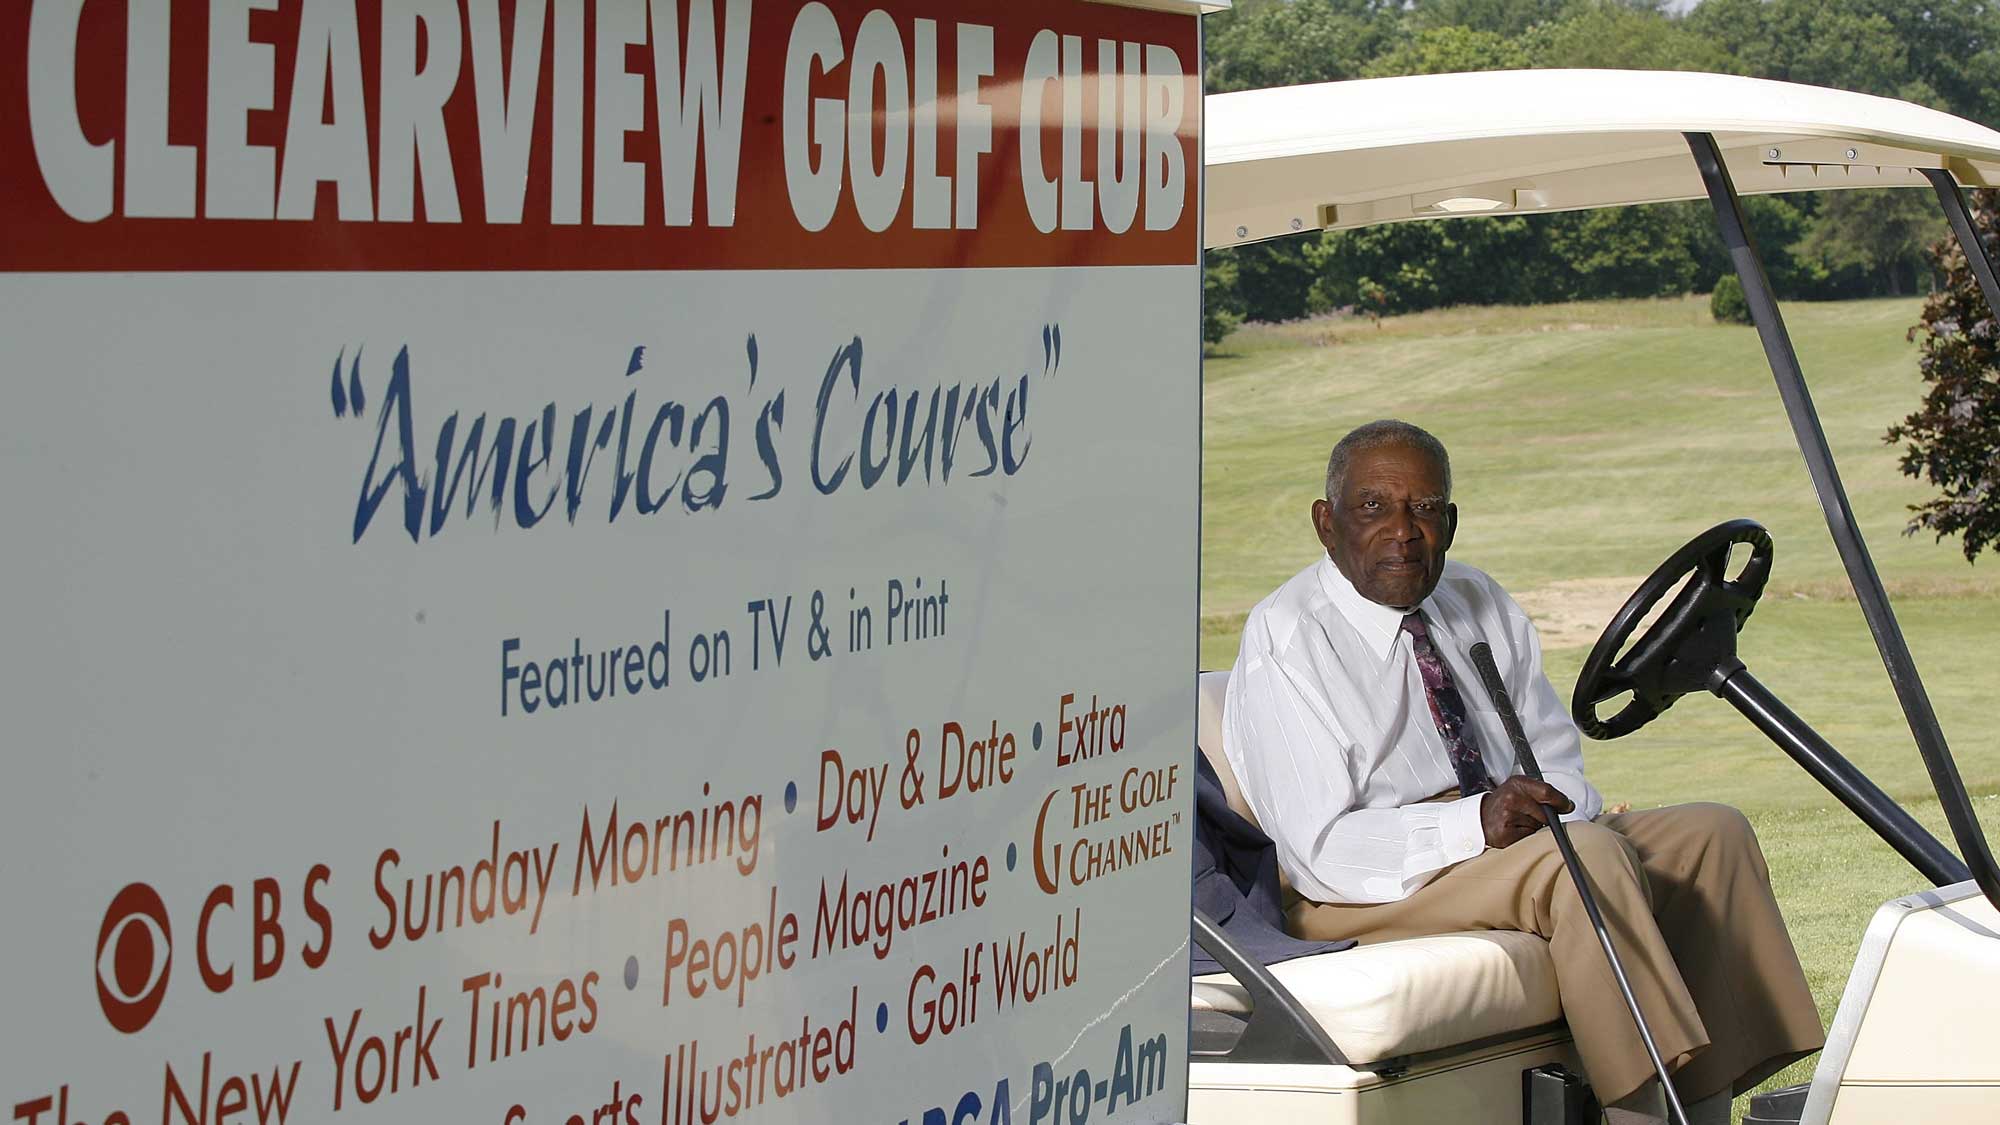 William Powell poses for a photo at Clearview Golf Club on June 25, 2009 in East Canton, Ohio.